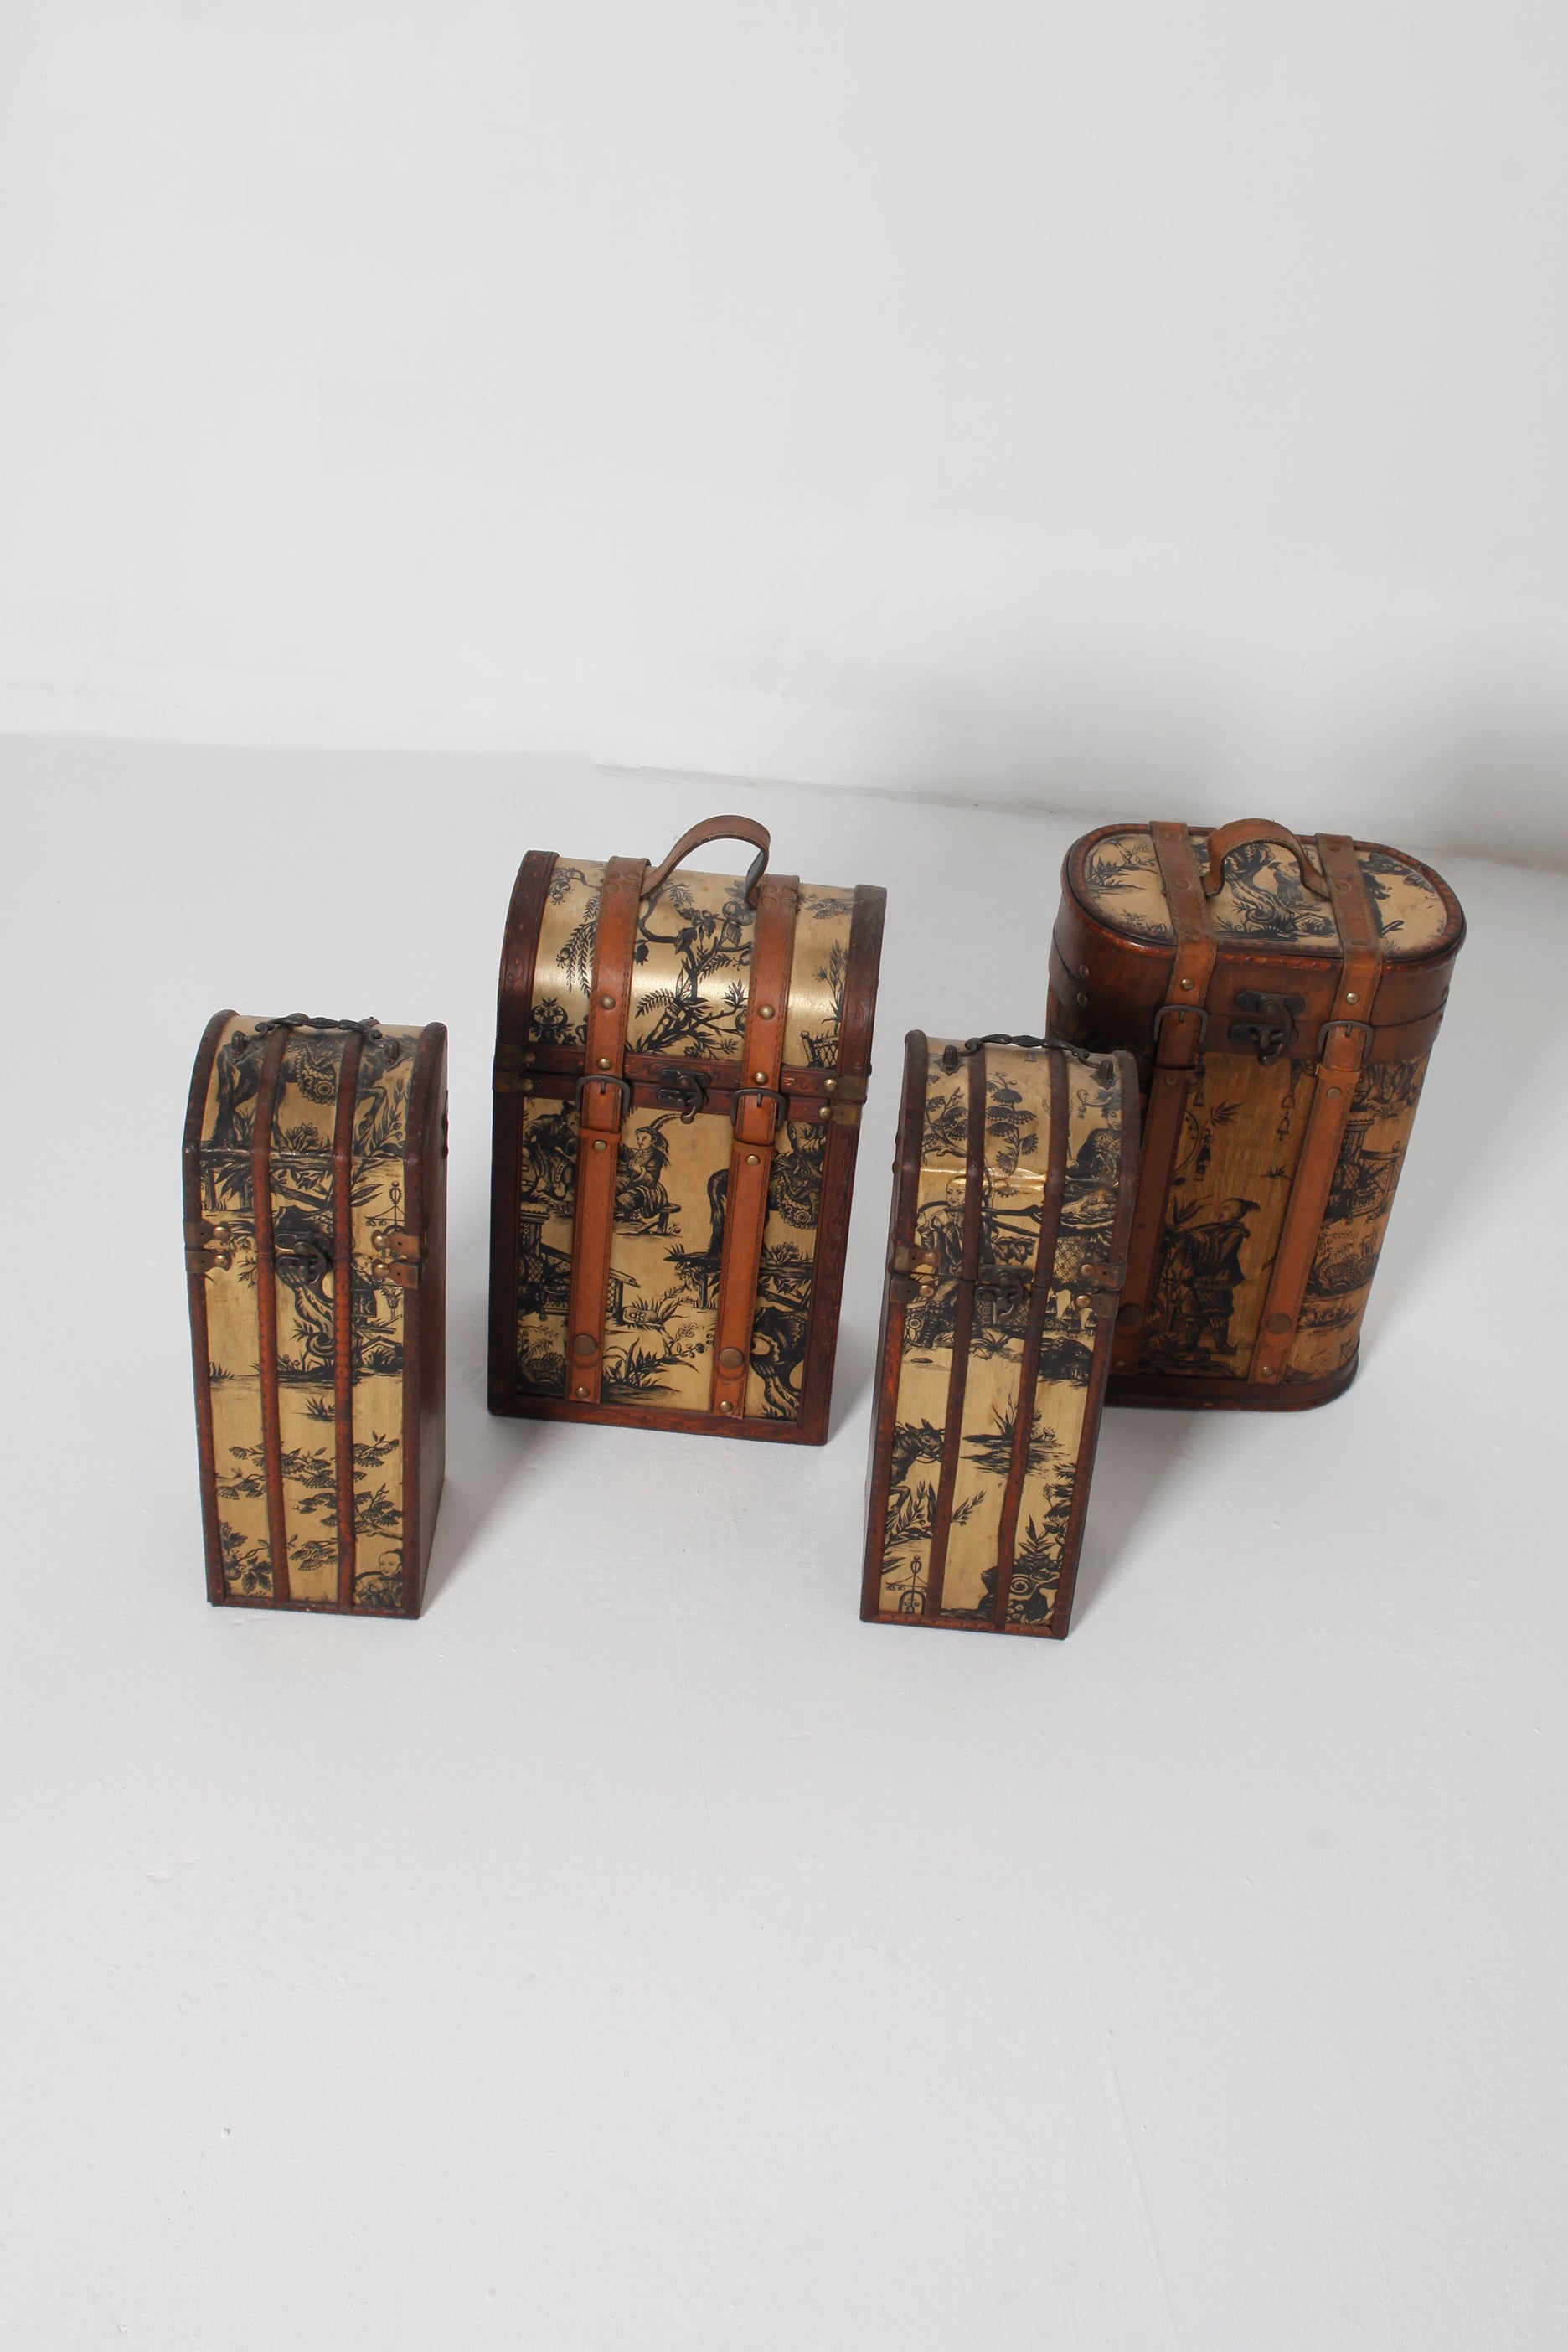 Set of Vintage Chinese Wooden Boxes (4 pieces)